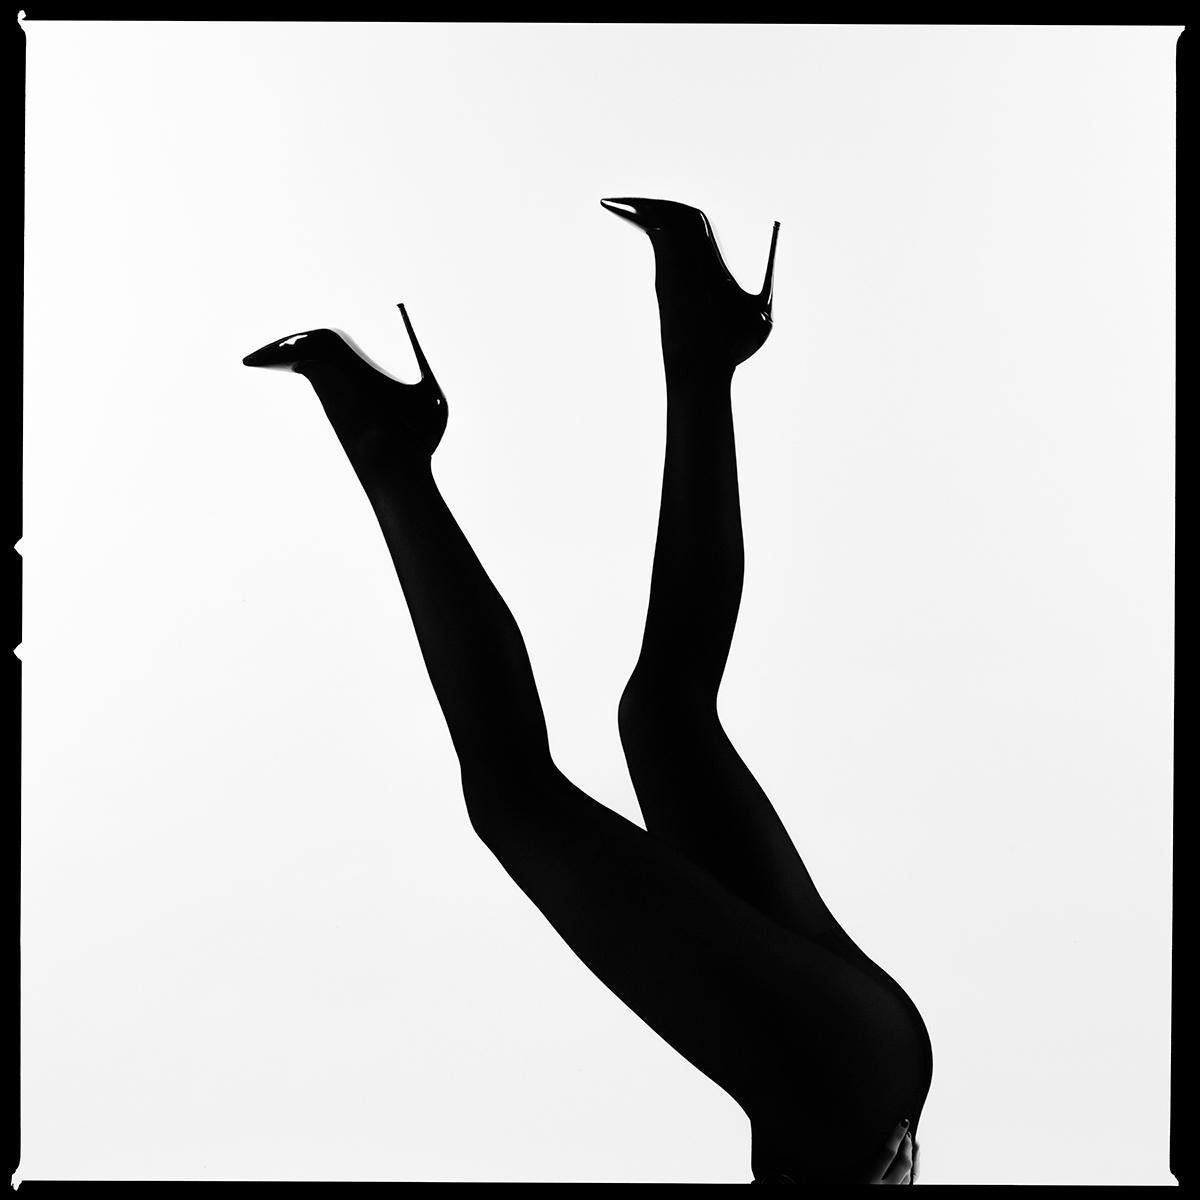 Series: Legs Up Silhouette
Chromogenic Print on Kodak Endura Luster Paper
All available sizes and editions:
18" x 18"
30" x 30"
45" x 45"
60" x 60"
70" x 70"
Editions of 3 + 2 Artist Proofs

Tyler Shields is a photographer, film director, and